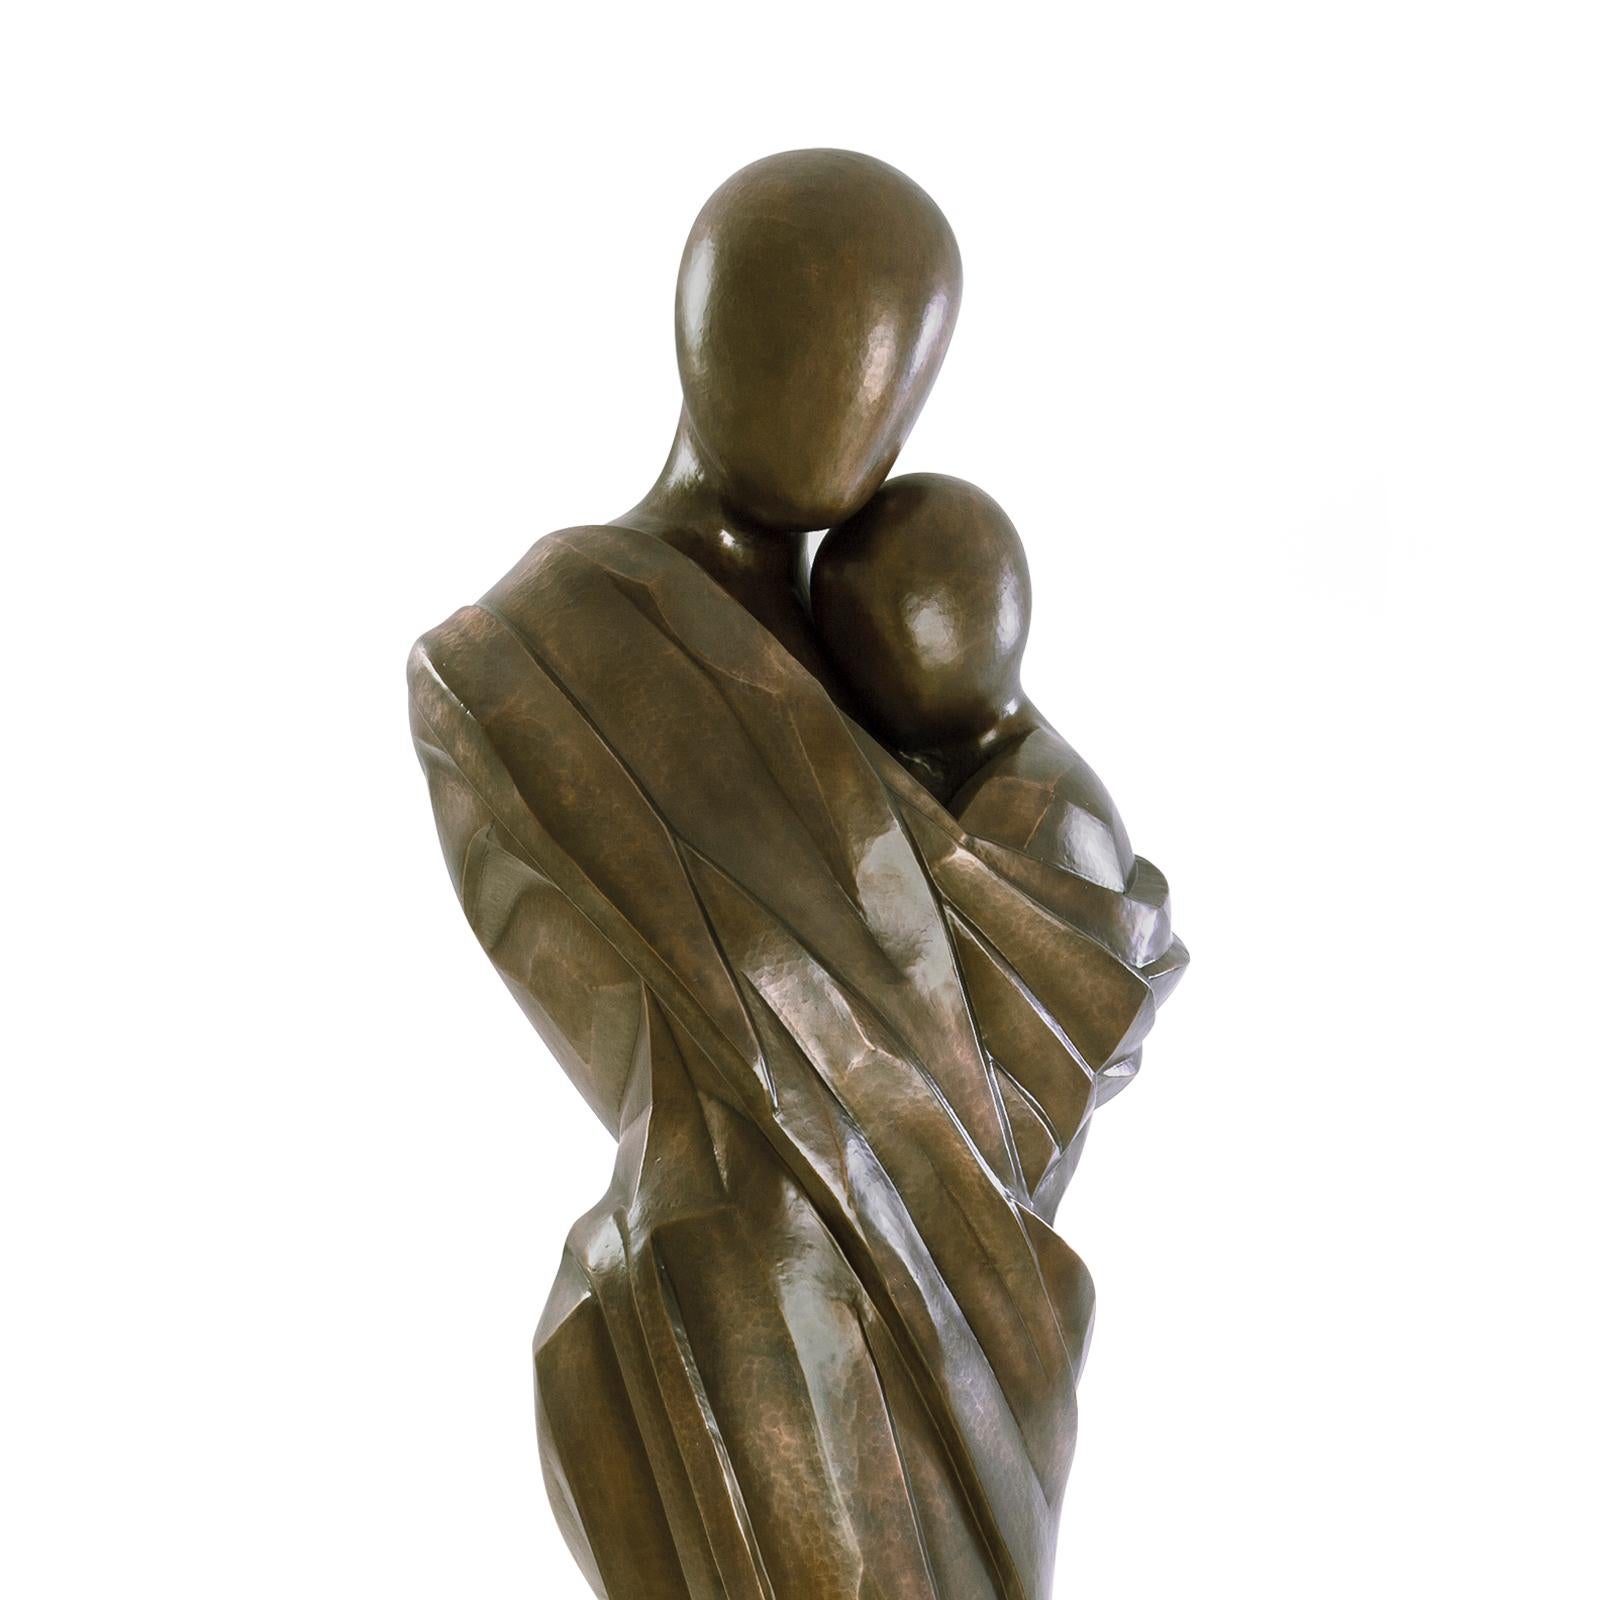 Sculpture woman and child in life-size scale.
All made in solid brass in vintage finish.
Exceptional piece.